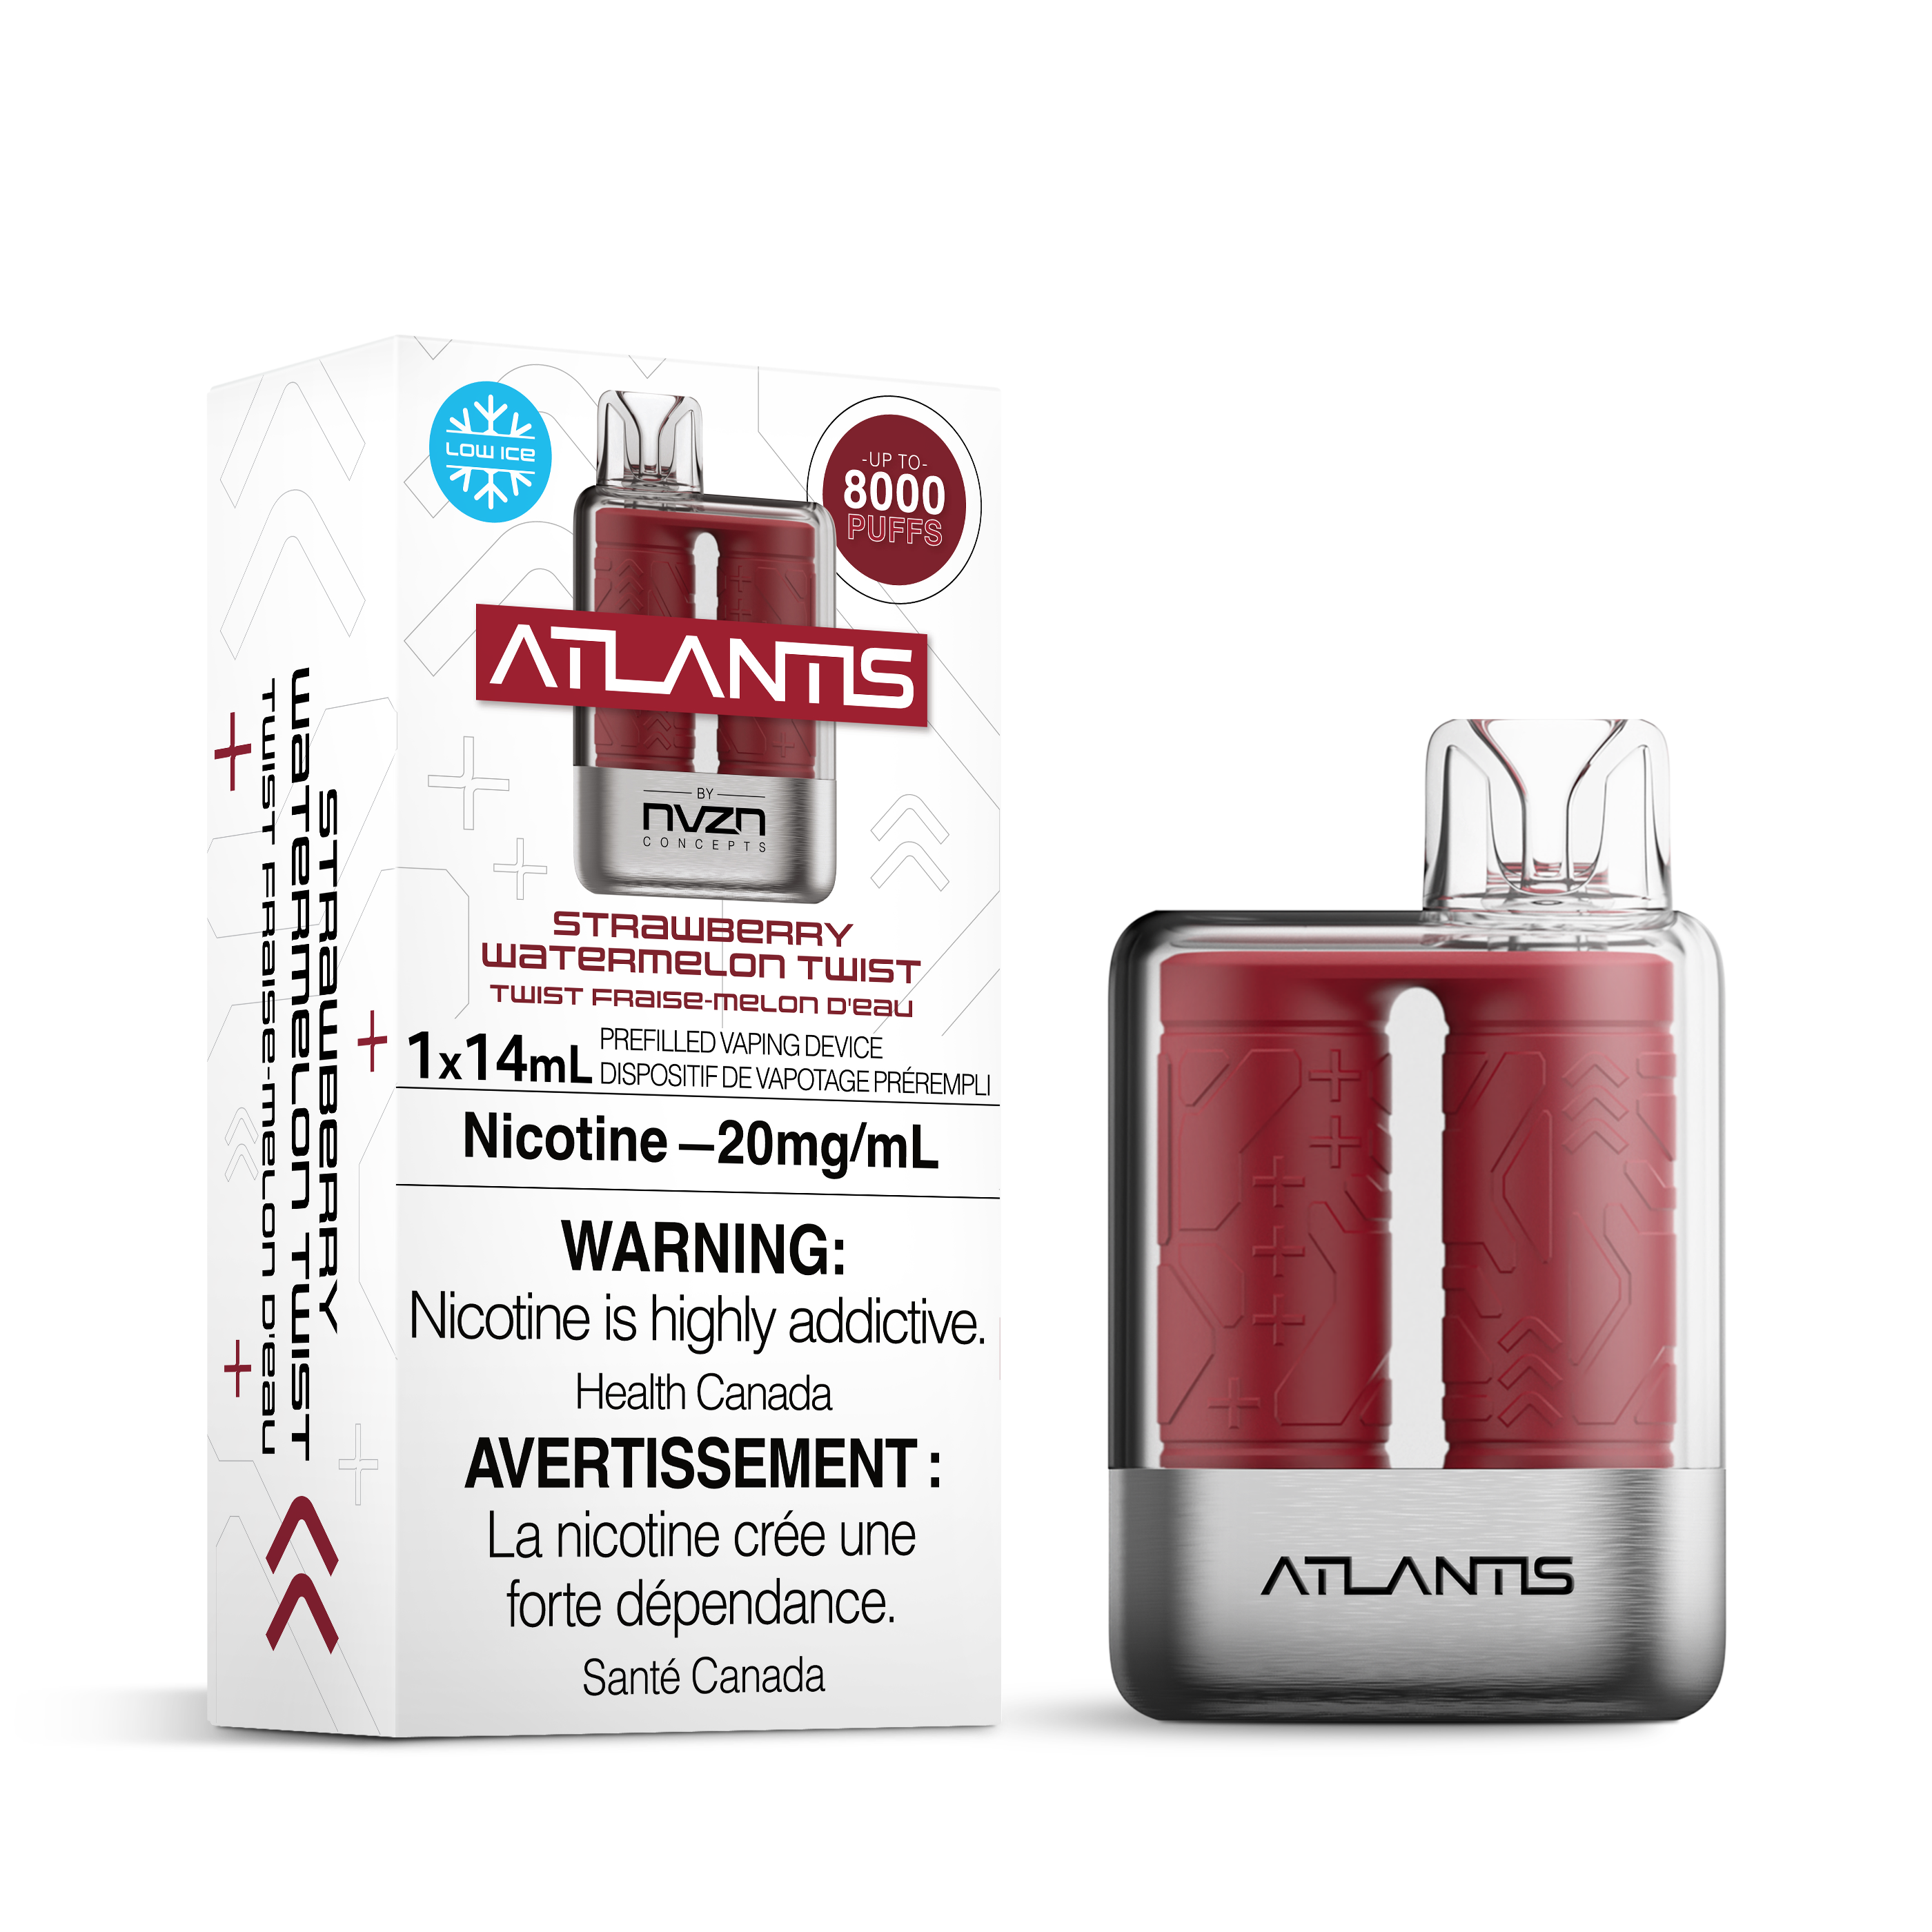 NVZN - Atlantis 8000 - Rechargeable Disposable - 8000 Puffs